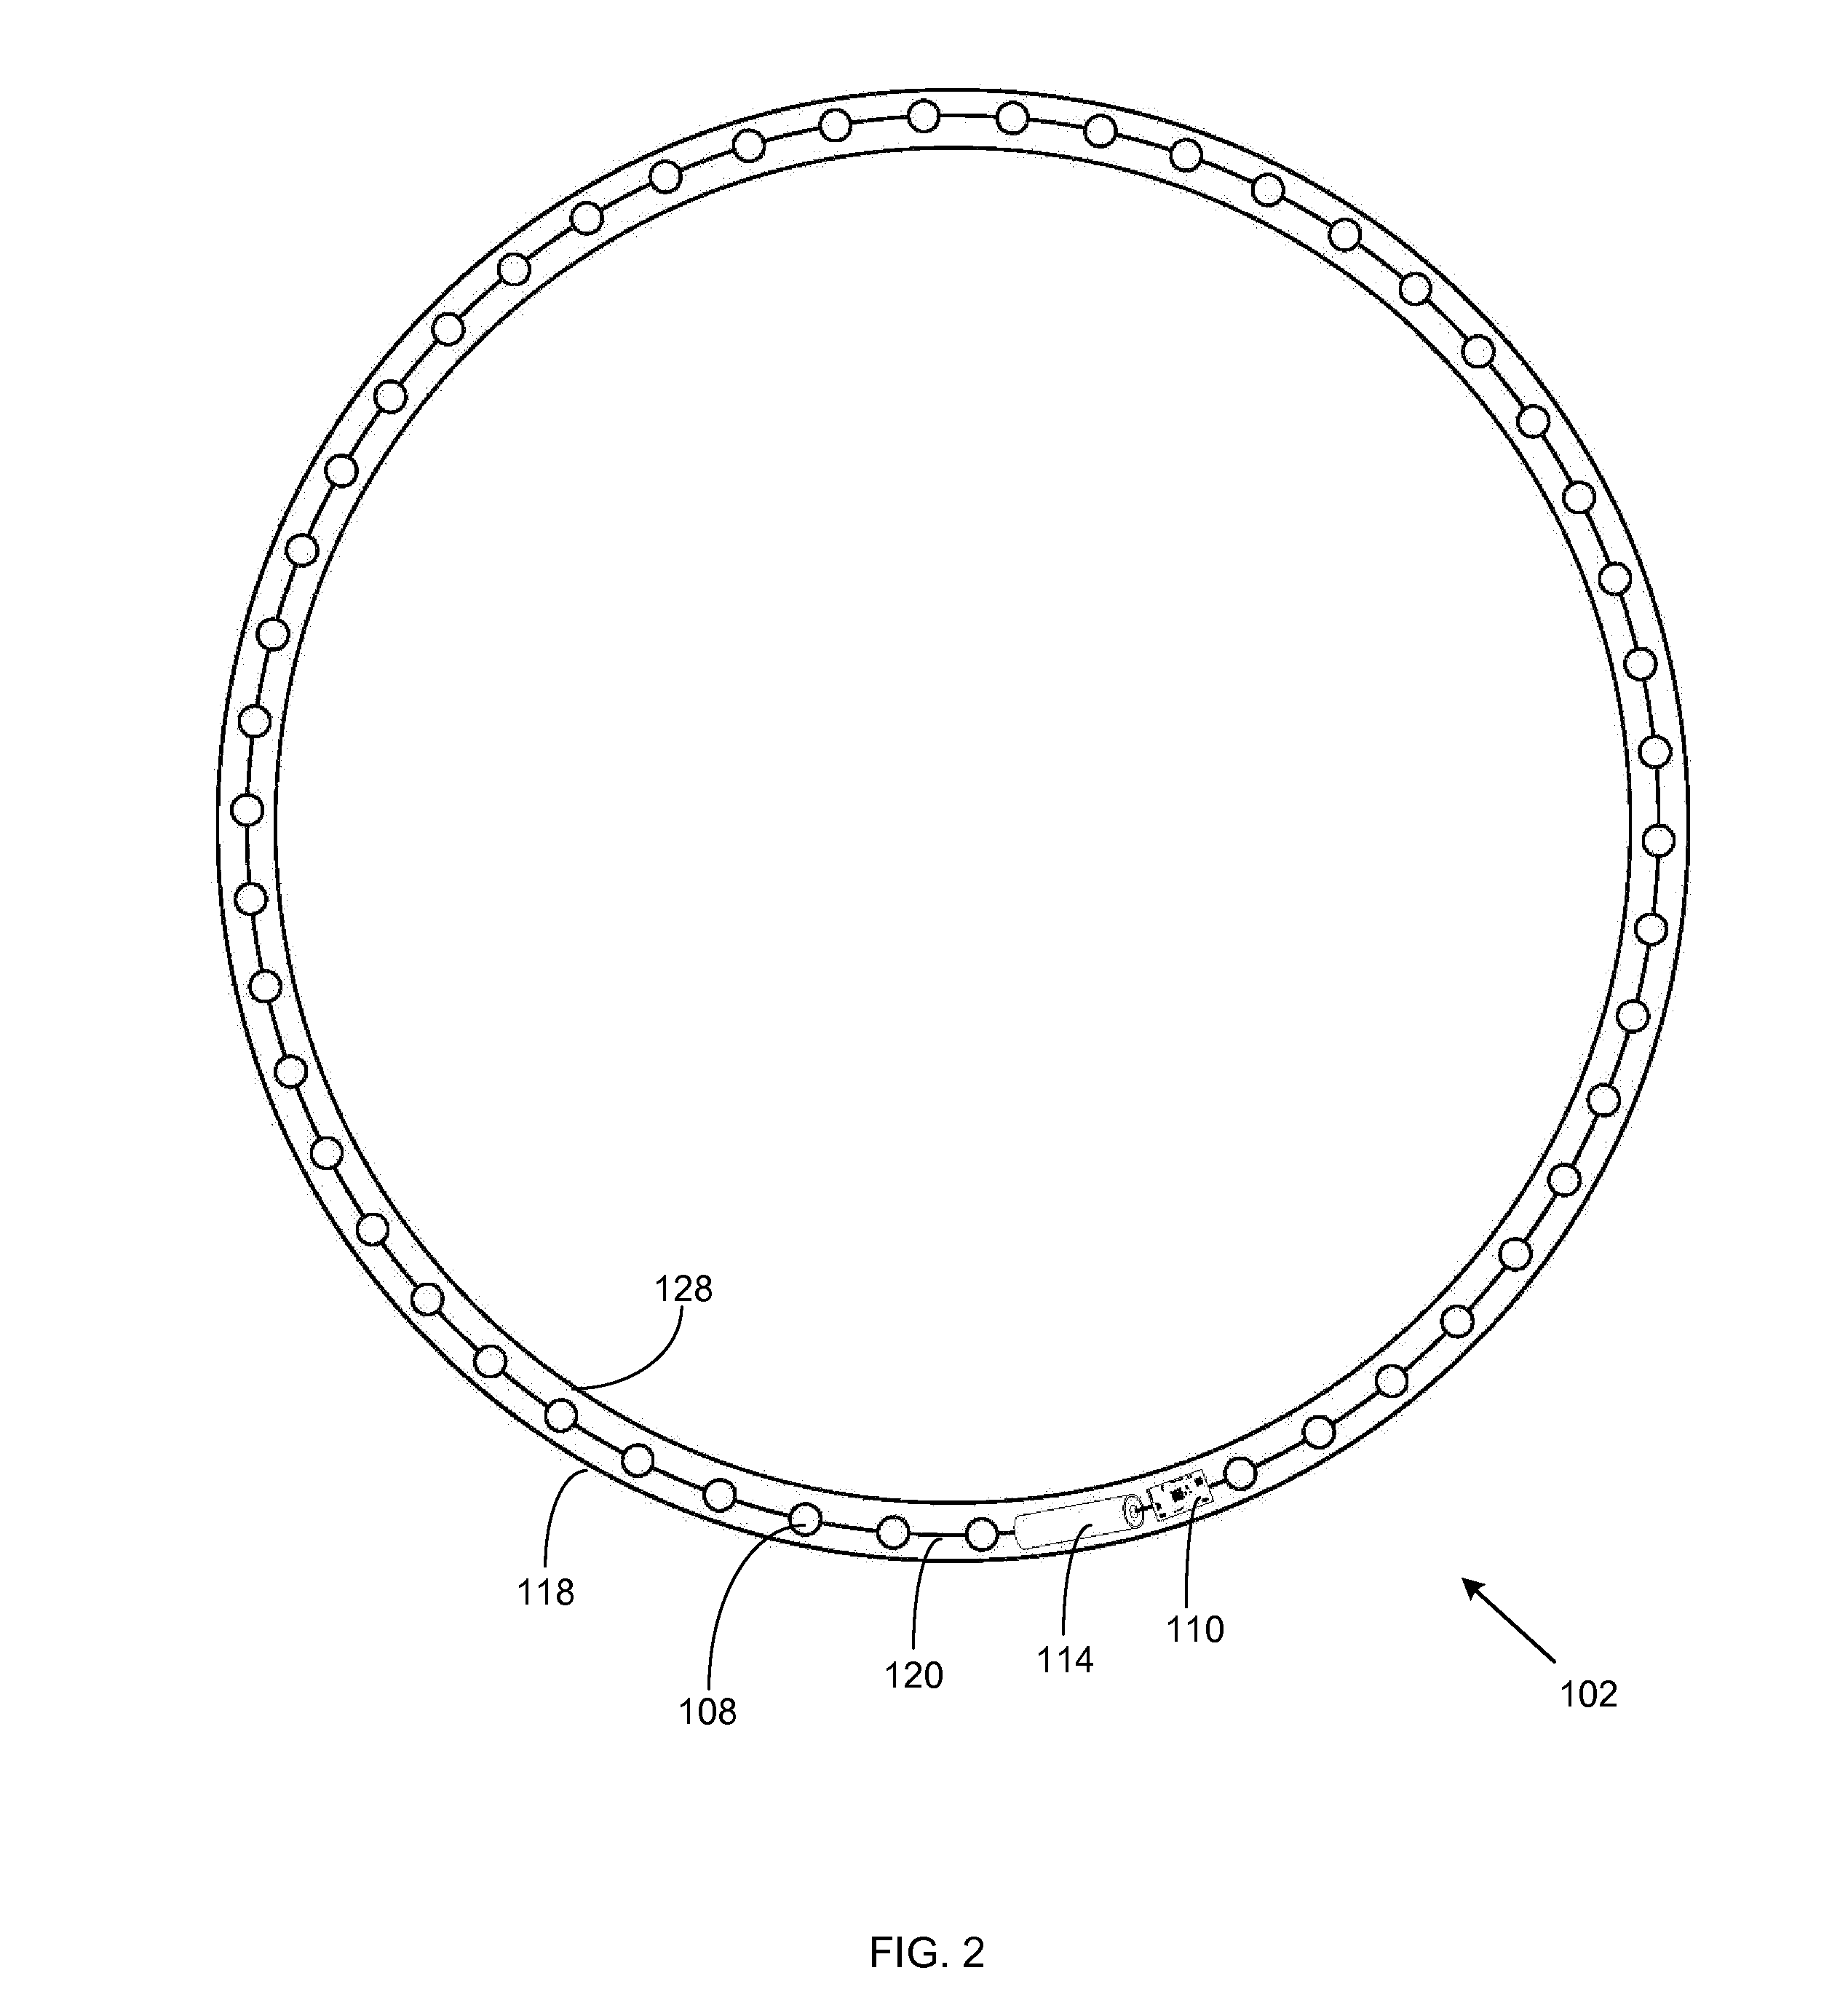 Holistic ring-based exercise system and method